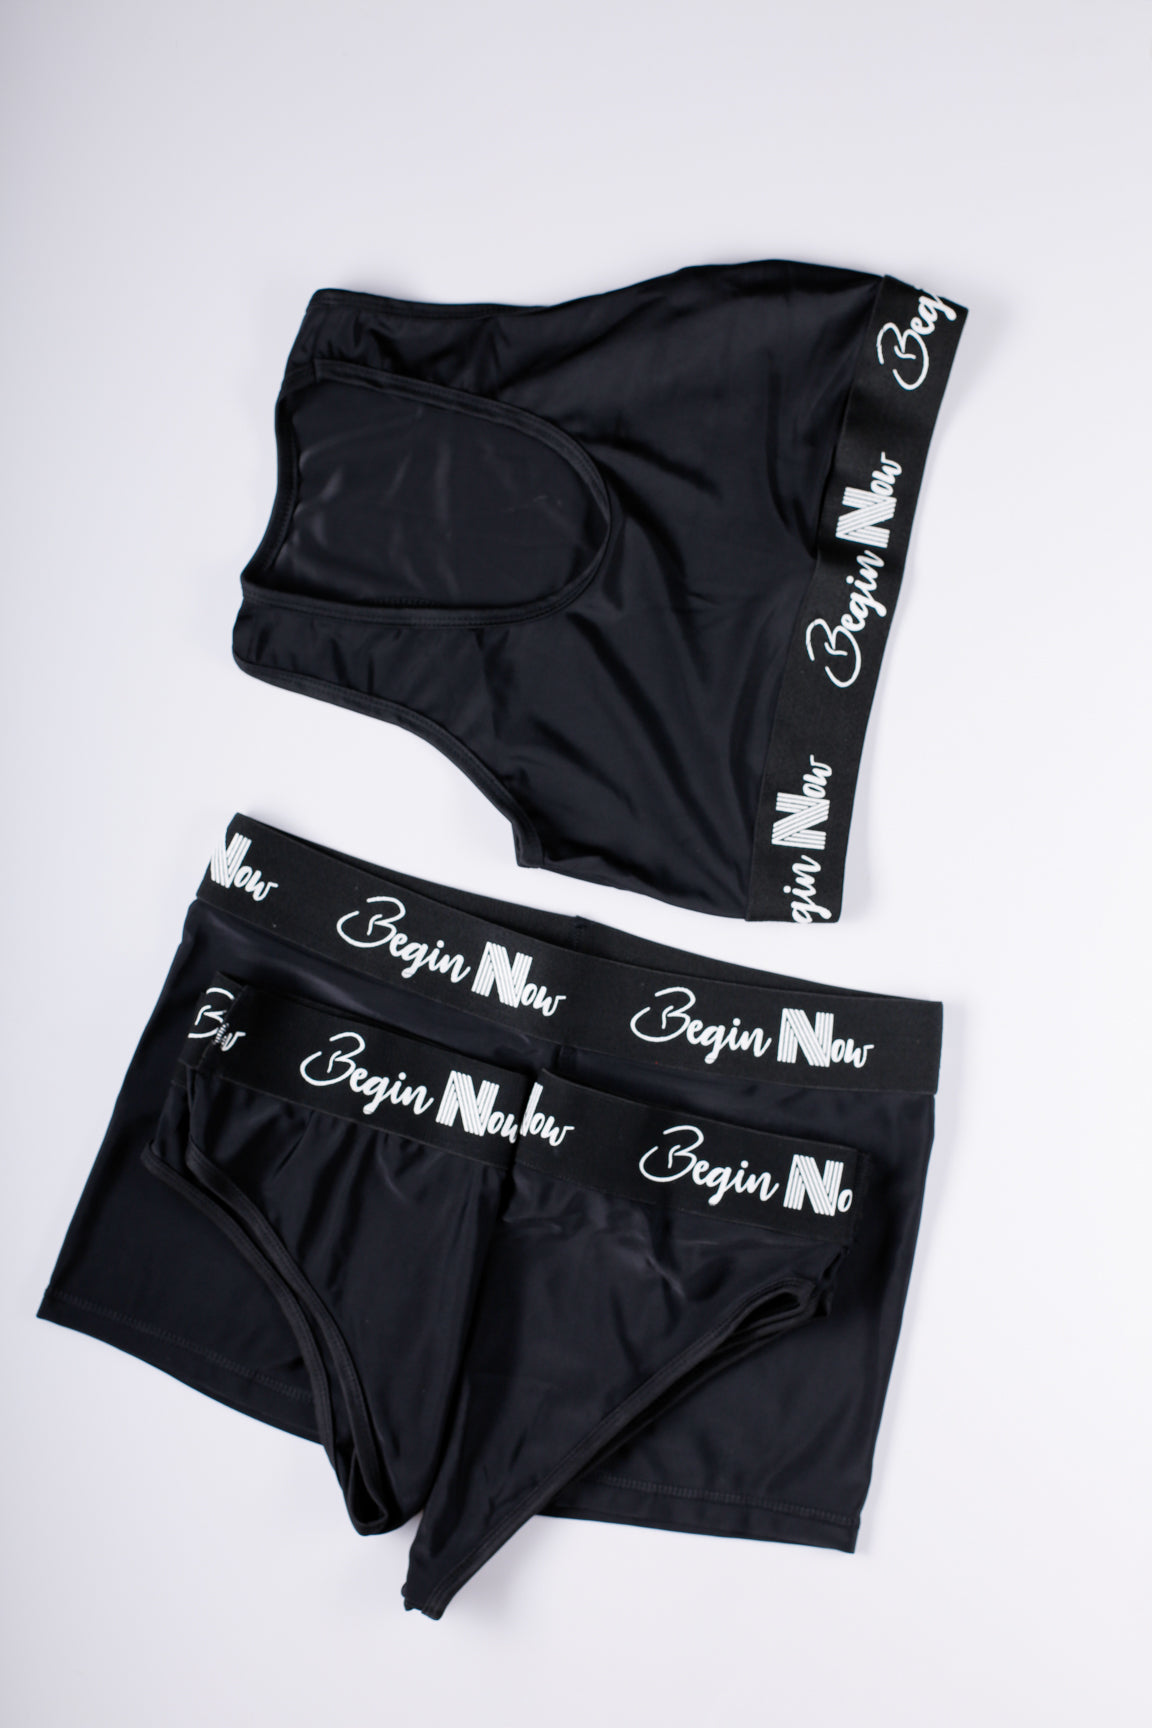 limited-edition-begin-now-signature-sweetheart-set-in-black.jpg